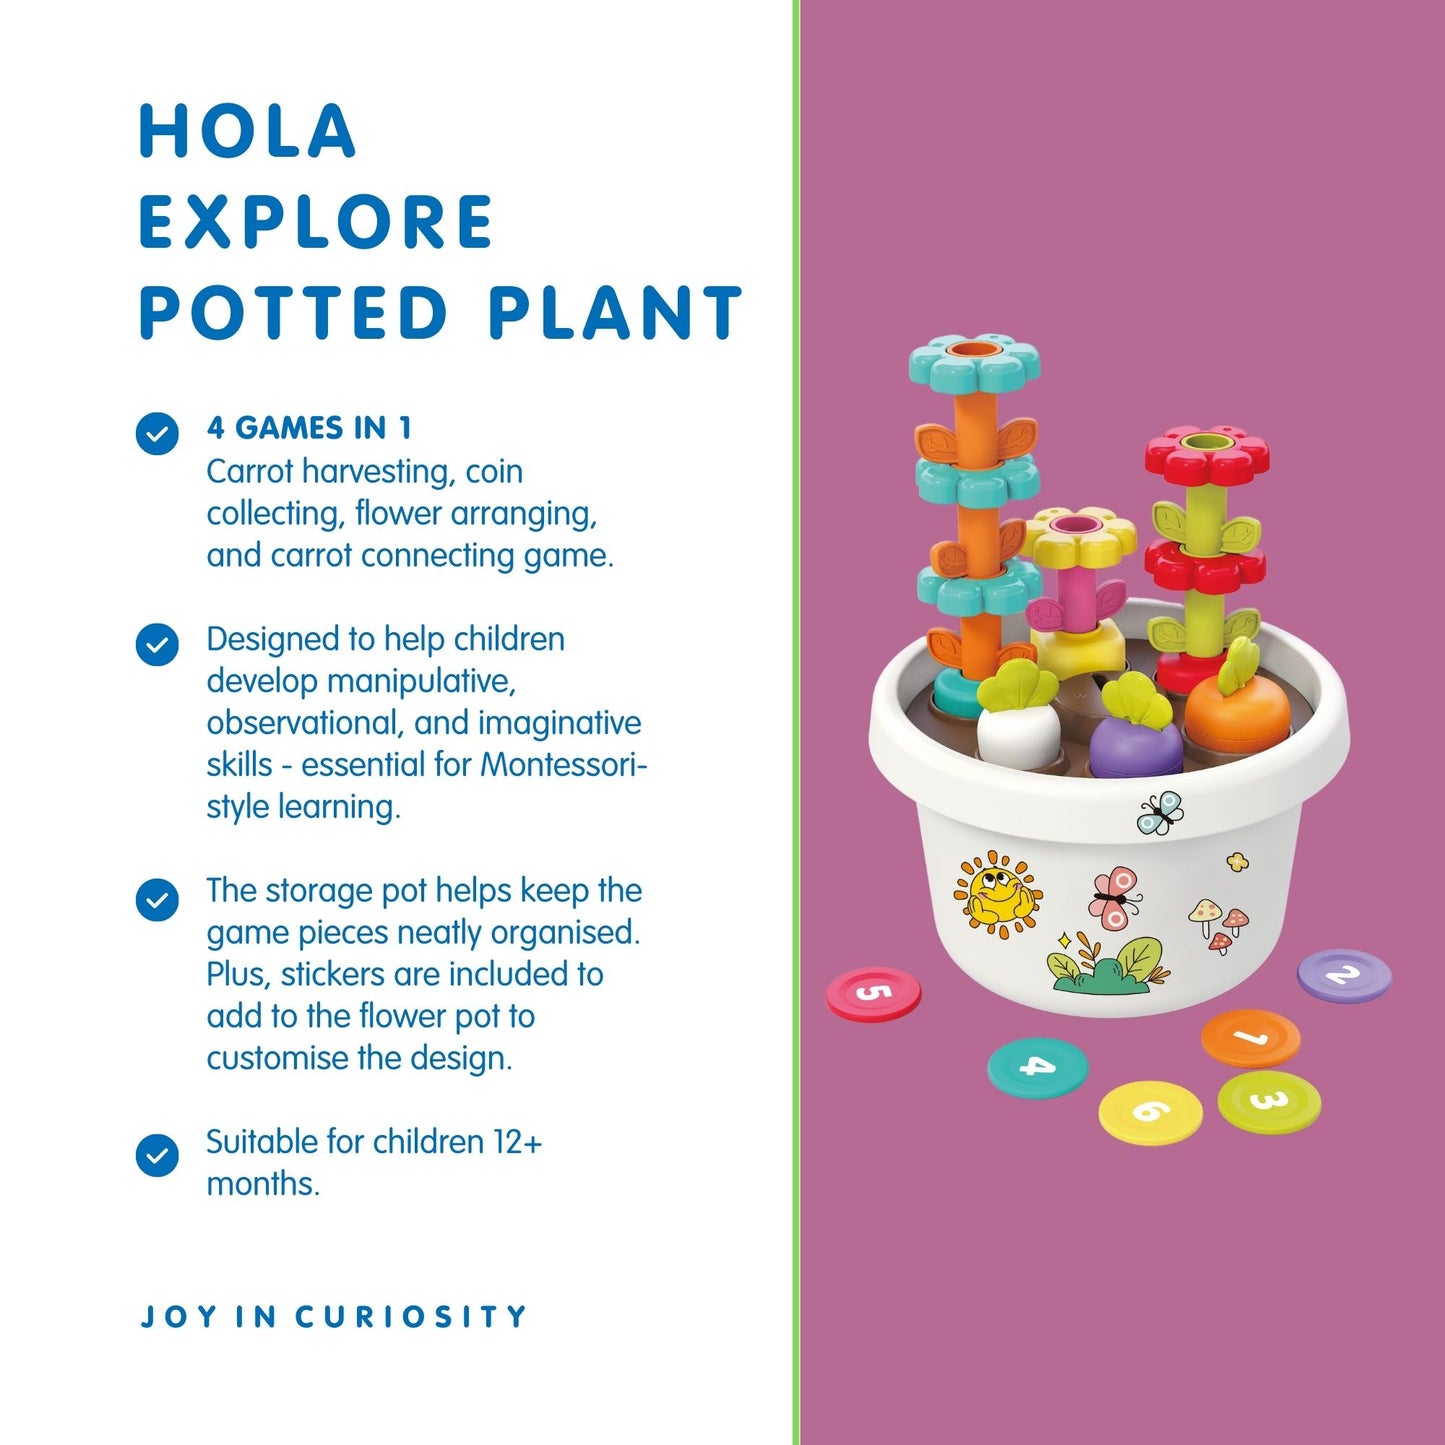 Hola Explore Potted Plant